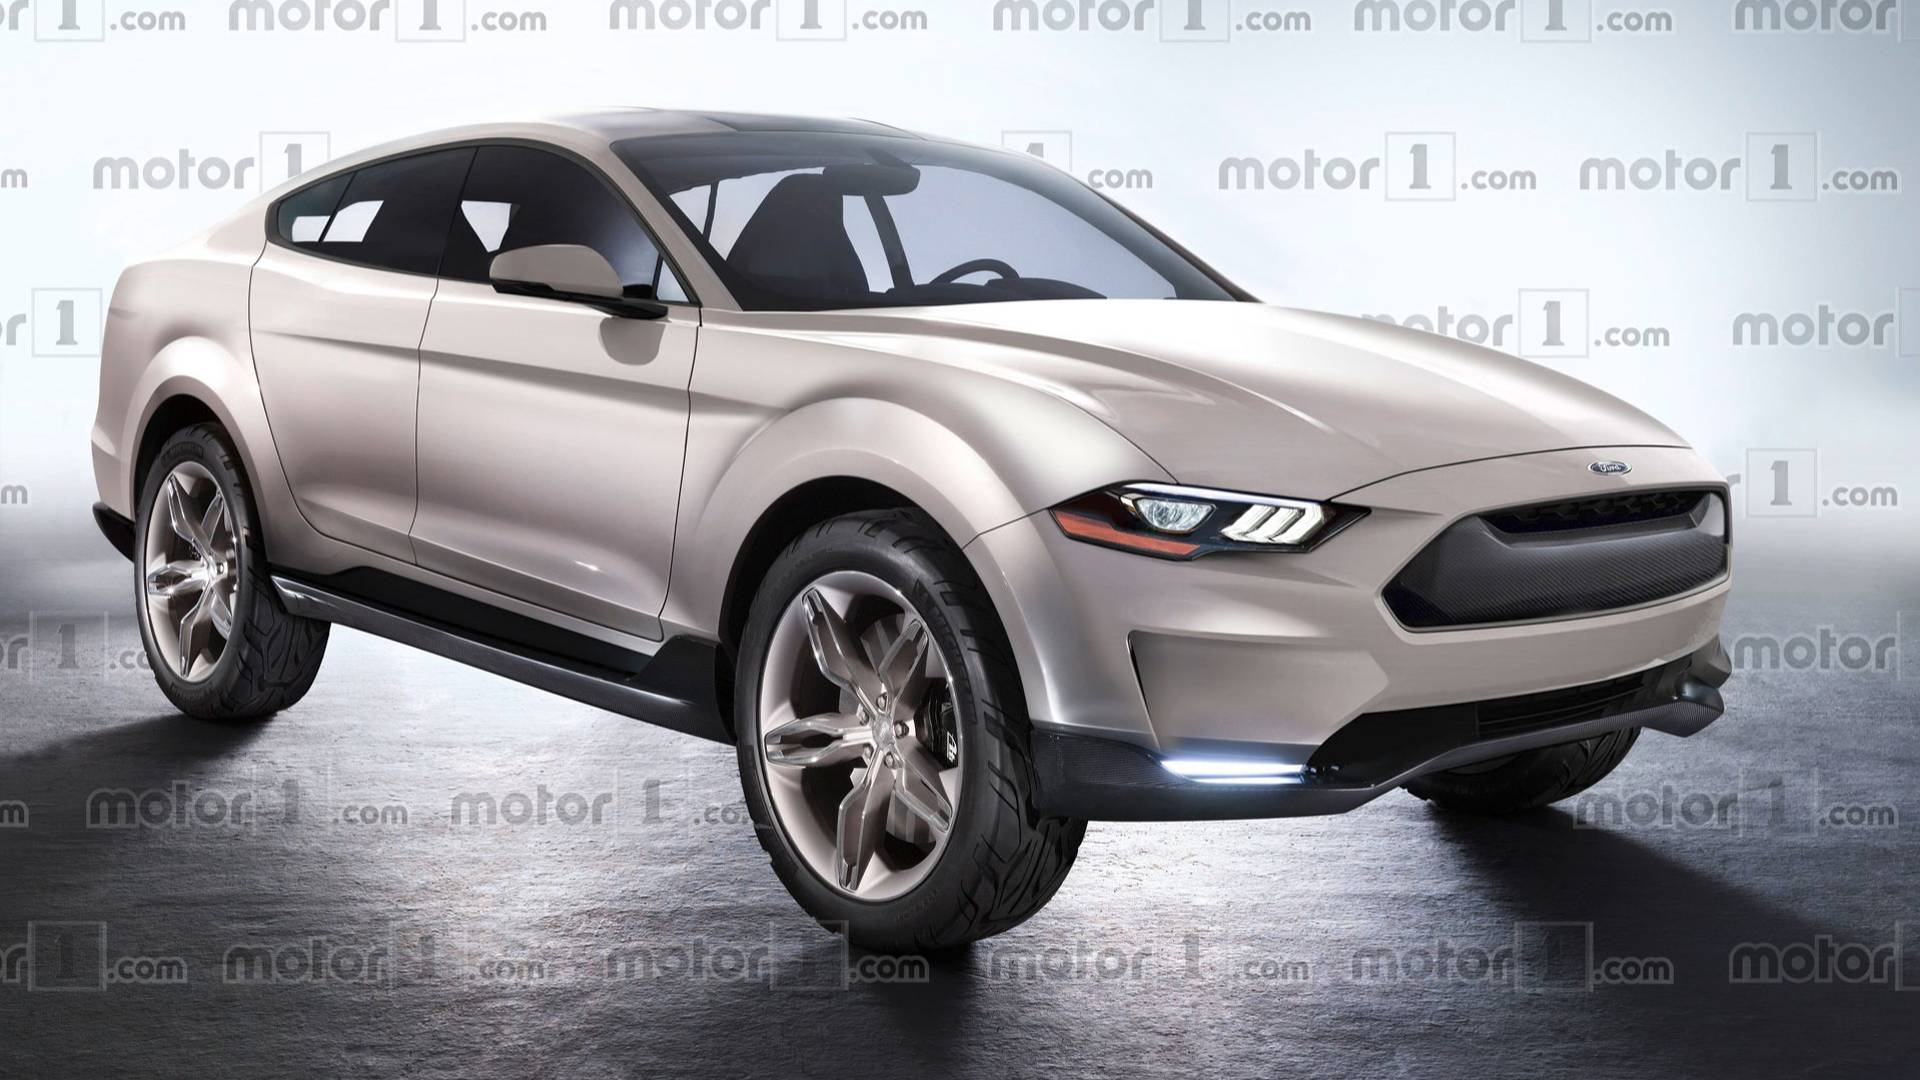 This Is What Ford's Mustang Based Electric SUV Might Look Like